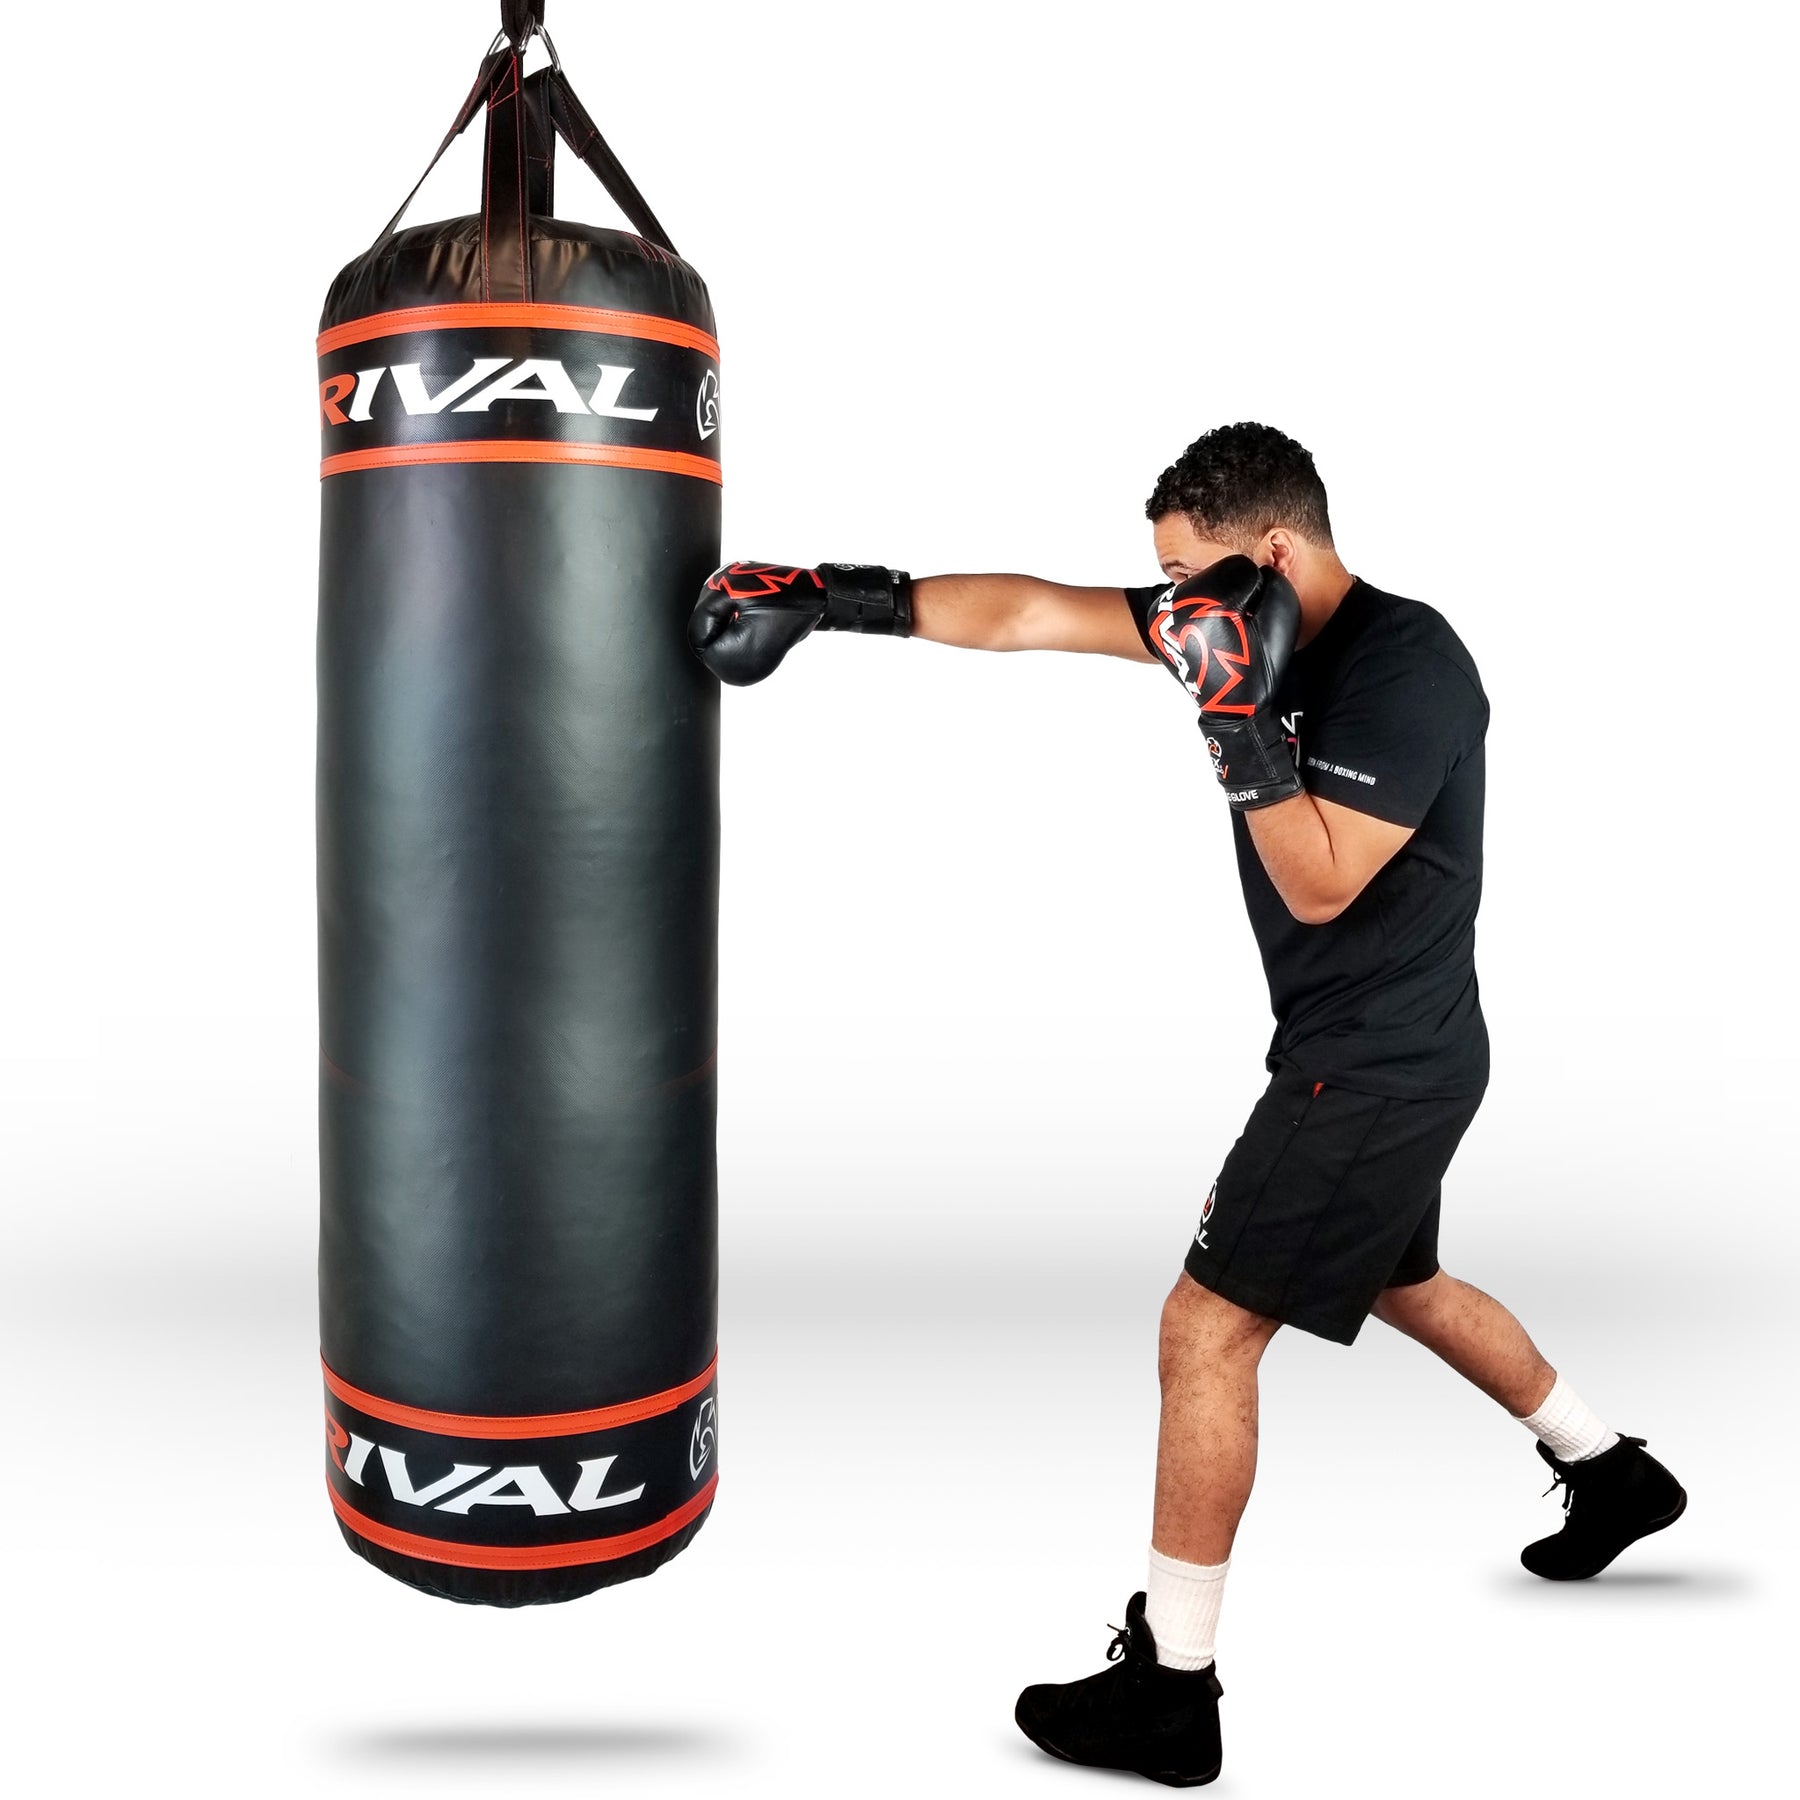 Punching Bags - Traditional Heavy Bags - FIGHTING OUTLET